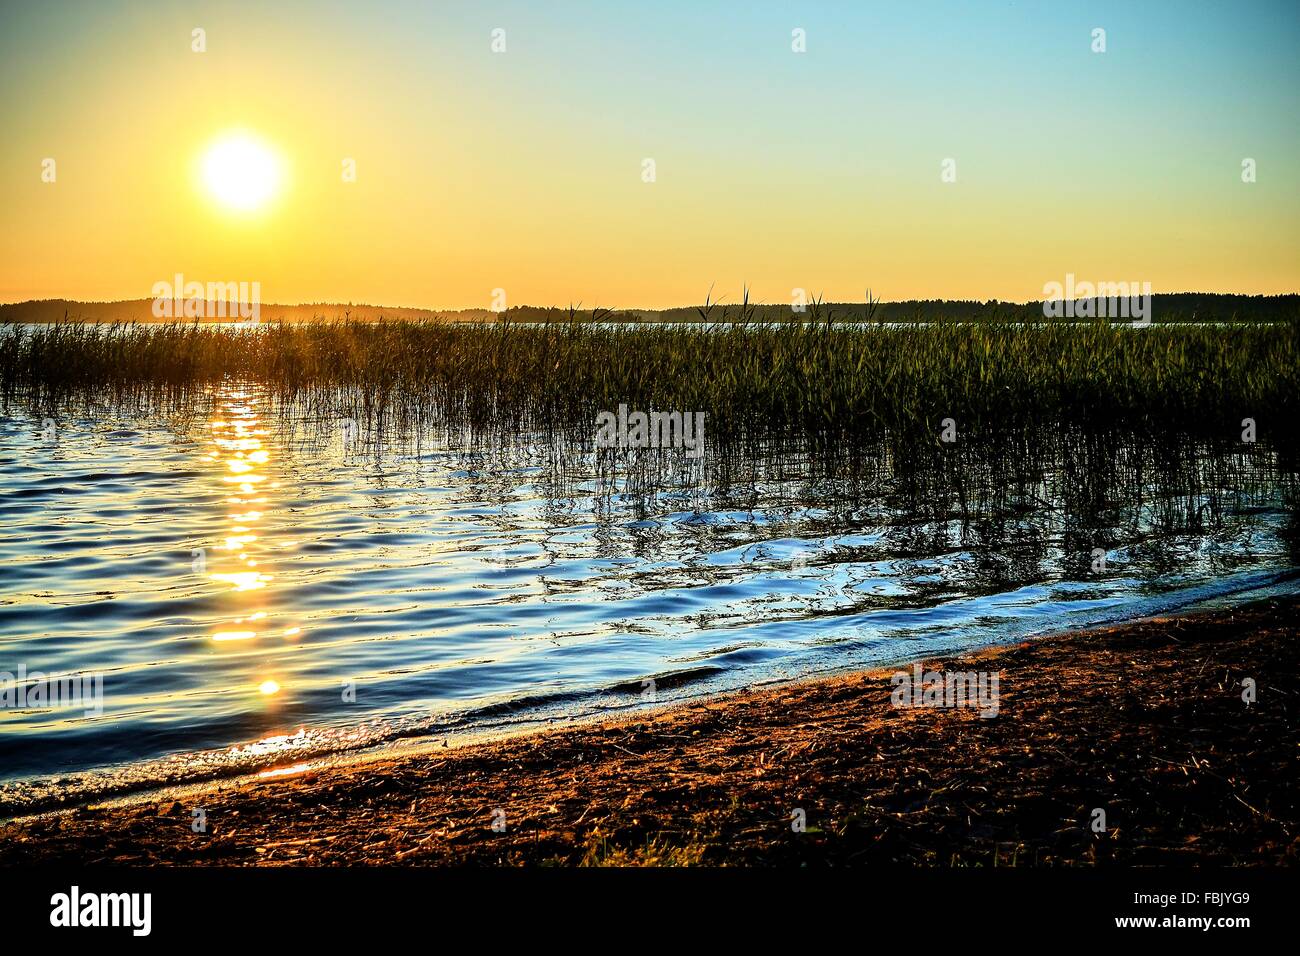 The evening sun sets over the stunning Lake Plateliai in Lithuania HDR Stock Photo